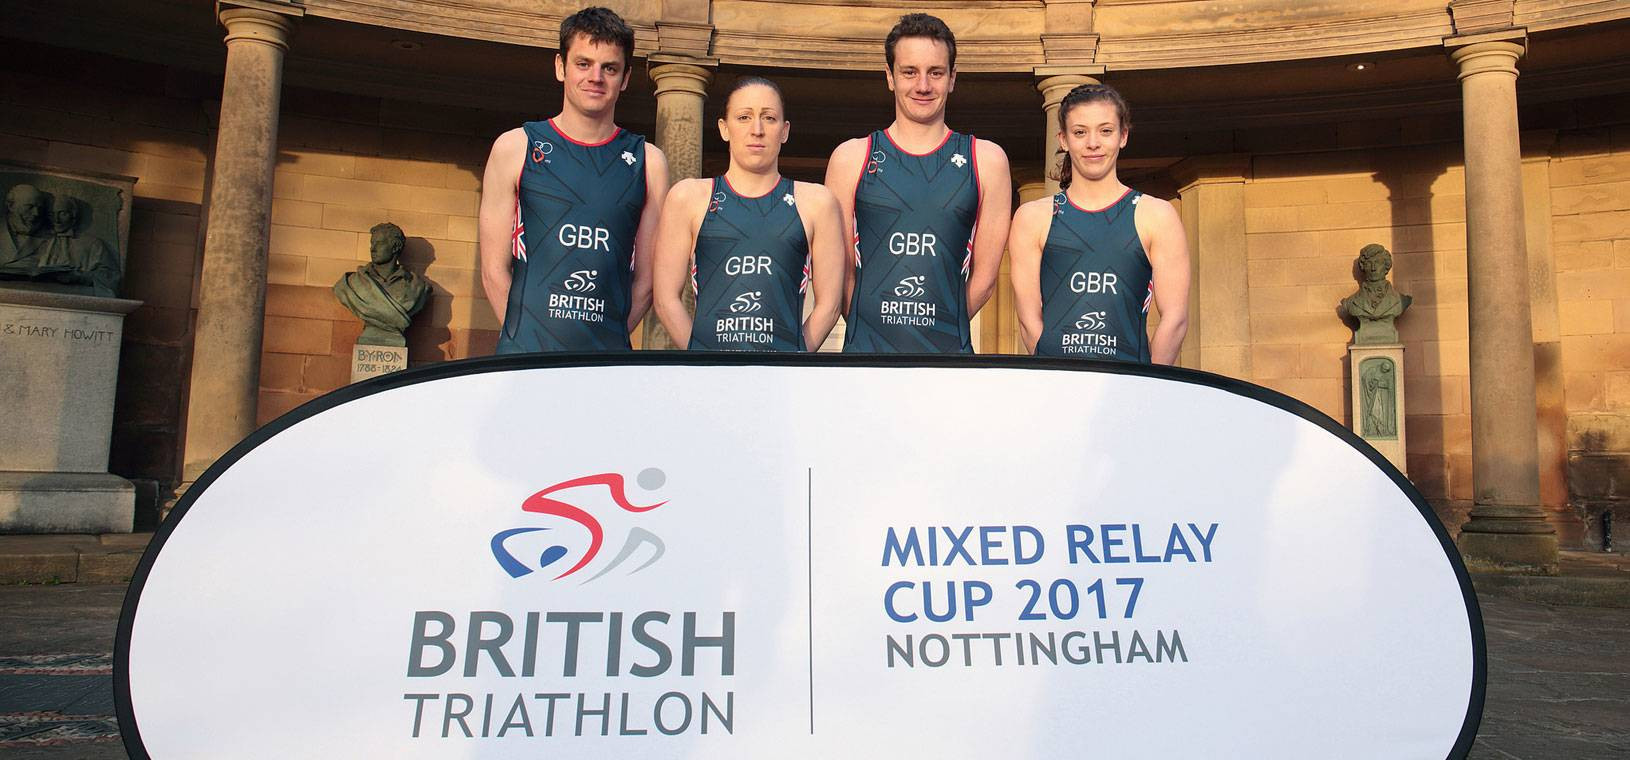 Nottingham hosted the Mixed Relay Cup in September ©British Triathlon